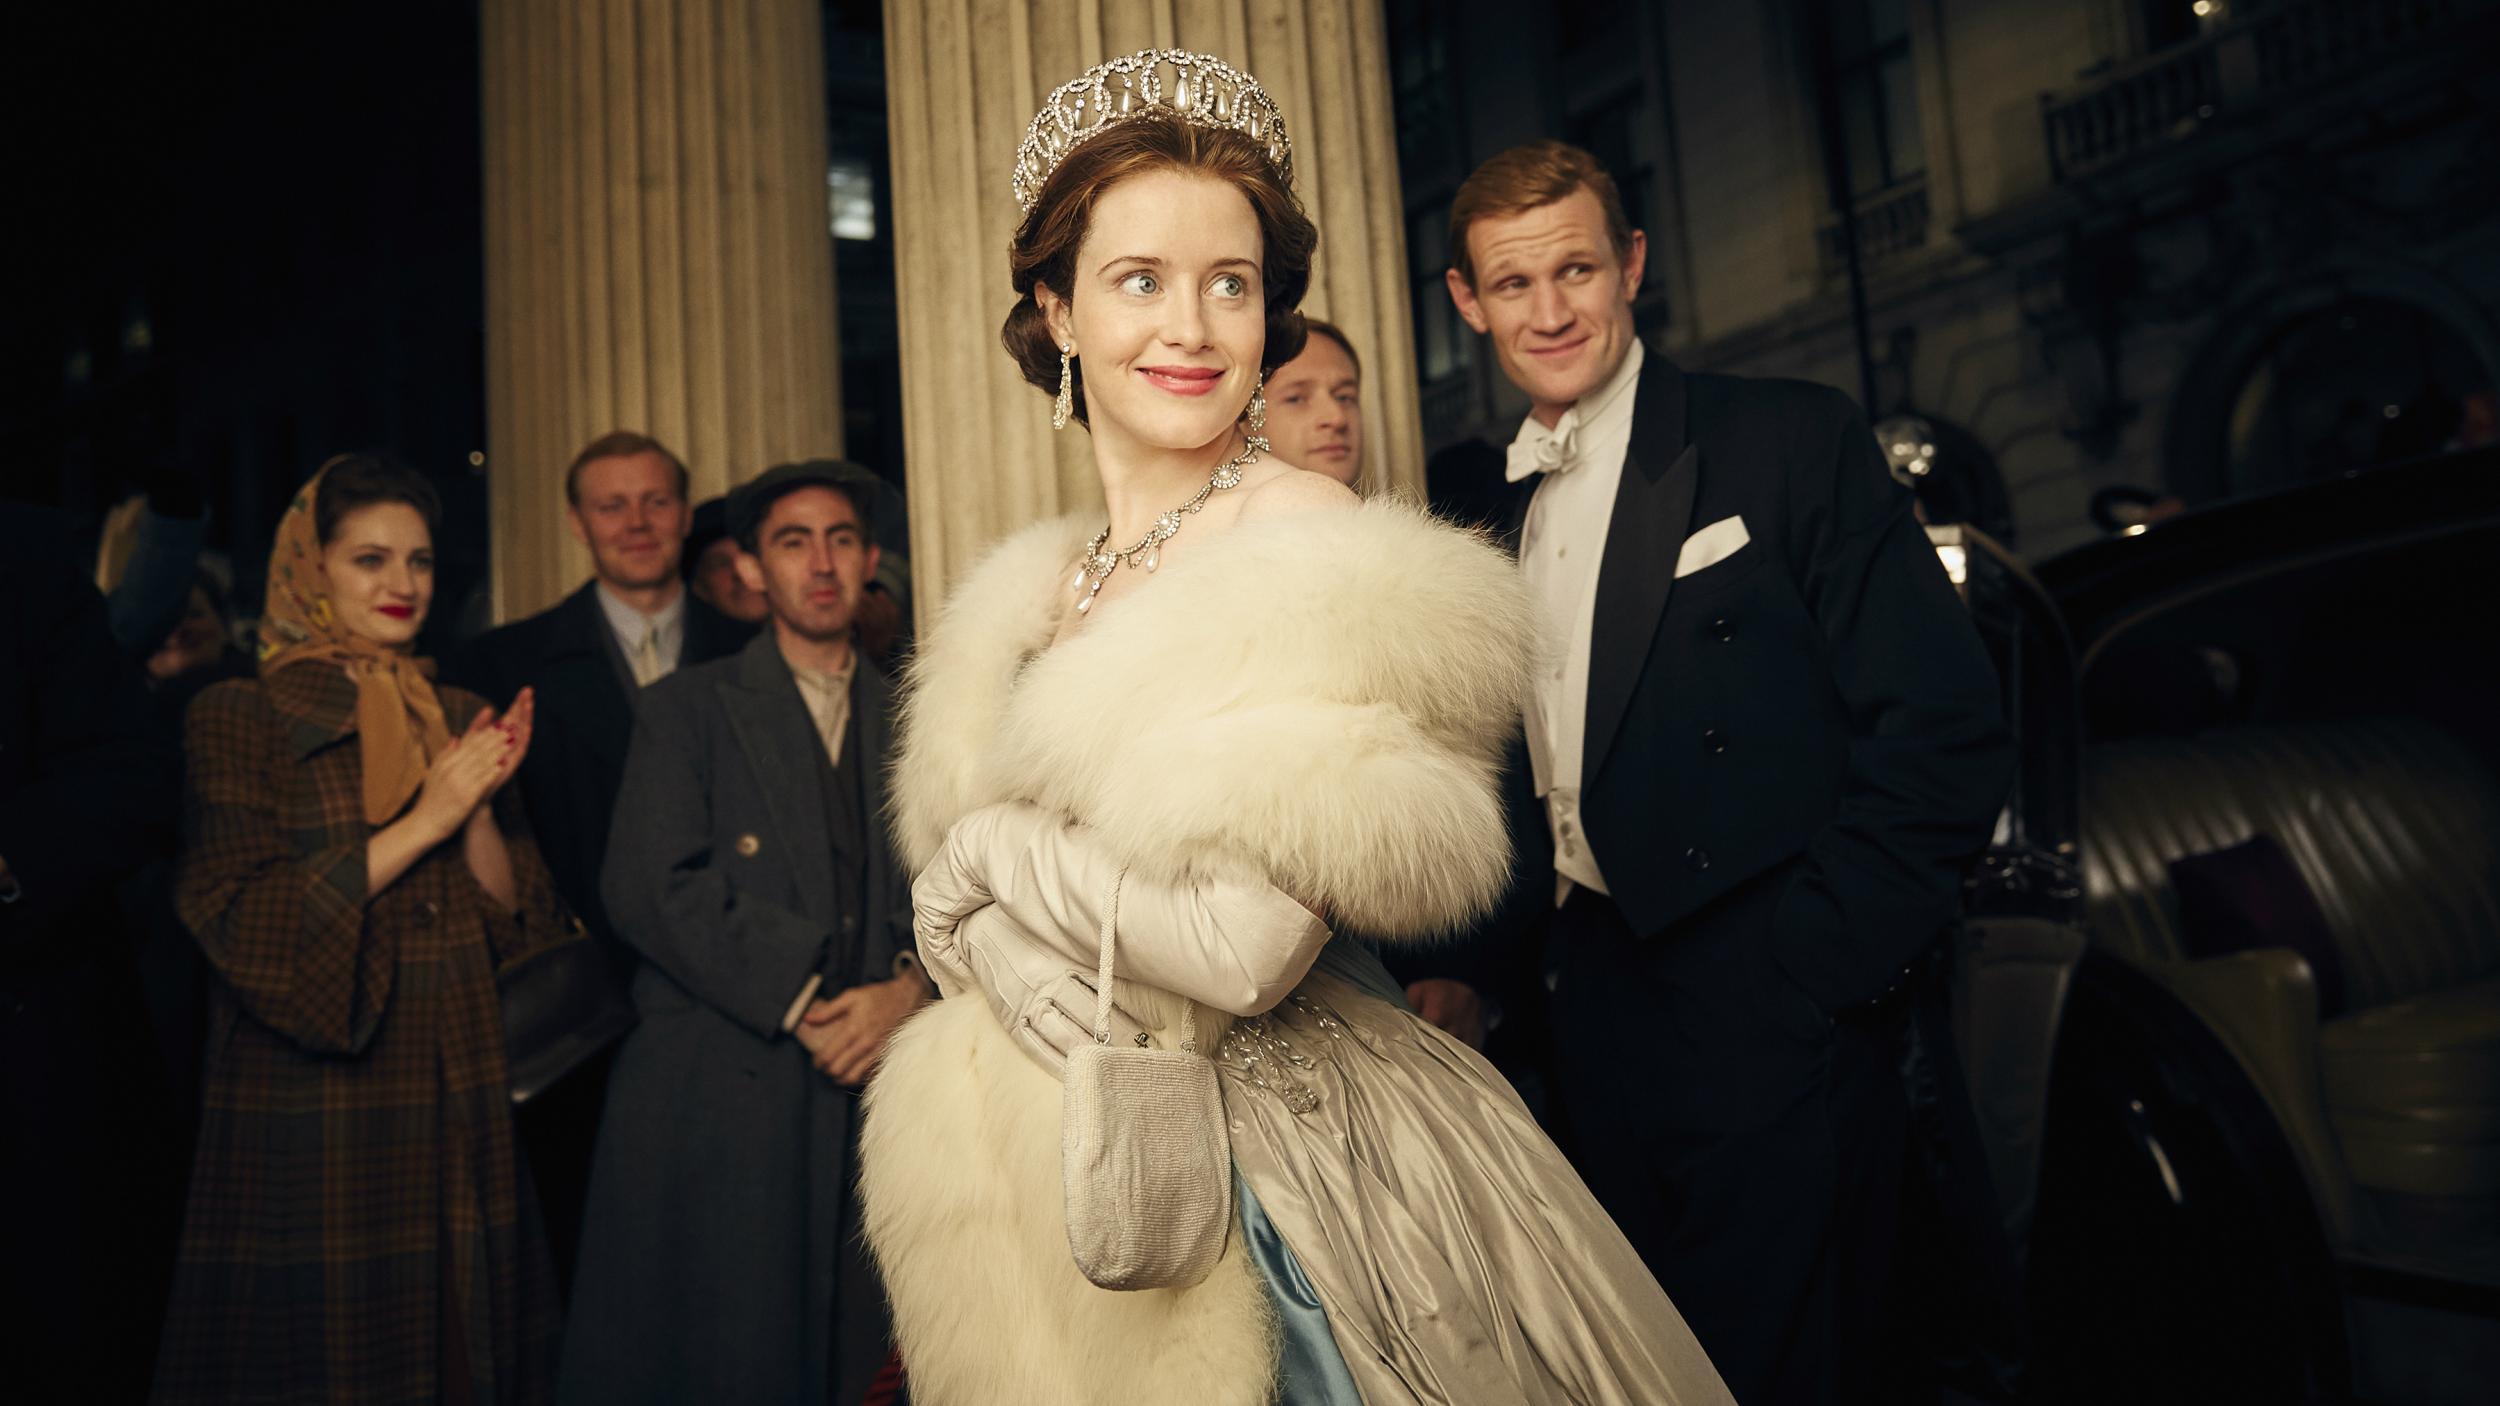 Claire Foy as Queen Elizabeth II and Matt Smith as Philip, Duke of Edinburgh in the Netflix hit ‘The Crown’